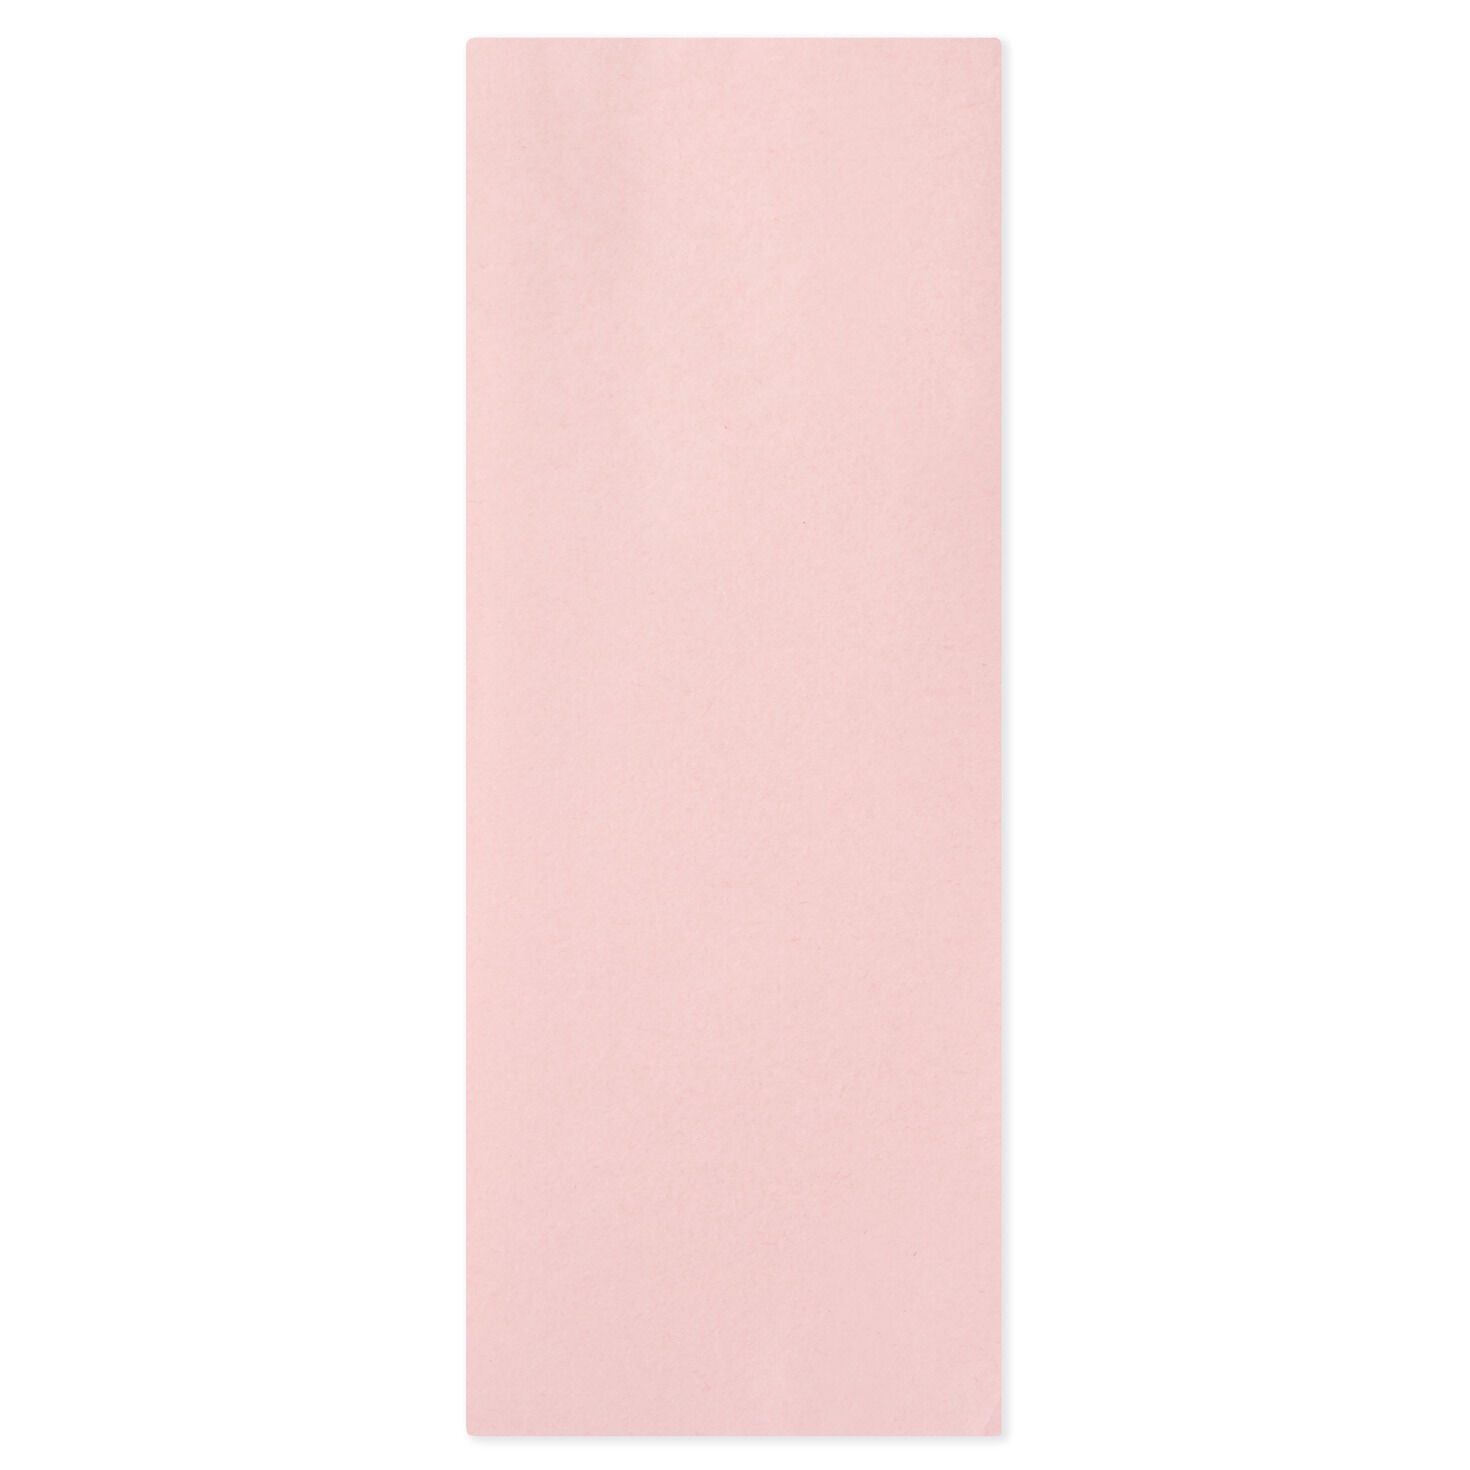 Pale Pink Tissue Paper, 8 Sheets for only USD 1.99 | Hallmark